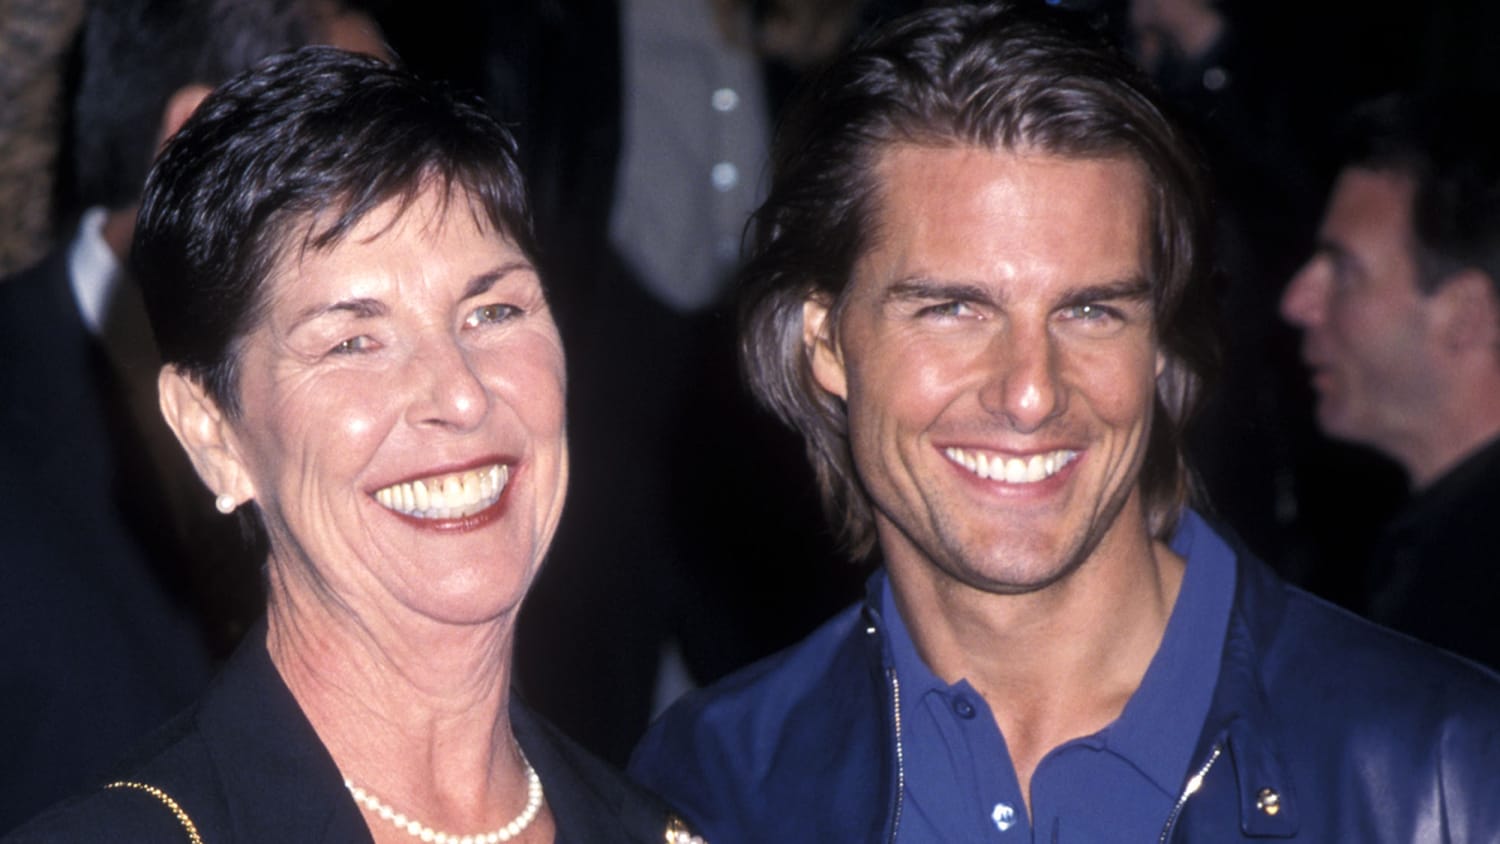 who is tom cruise's mother